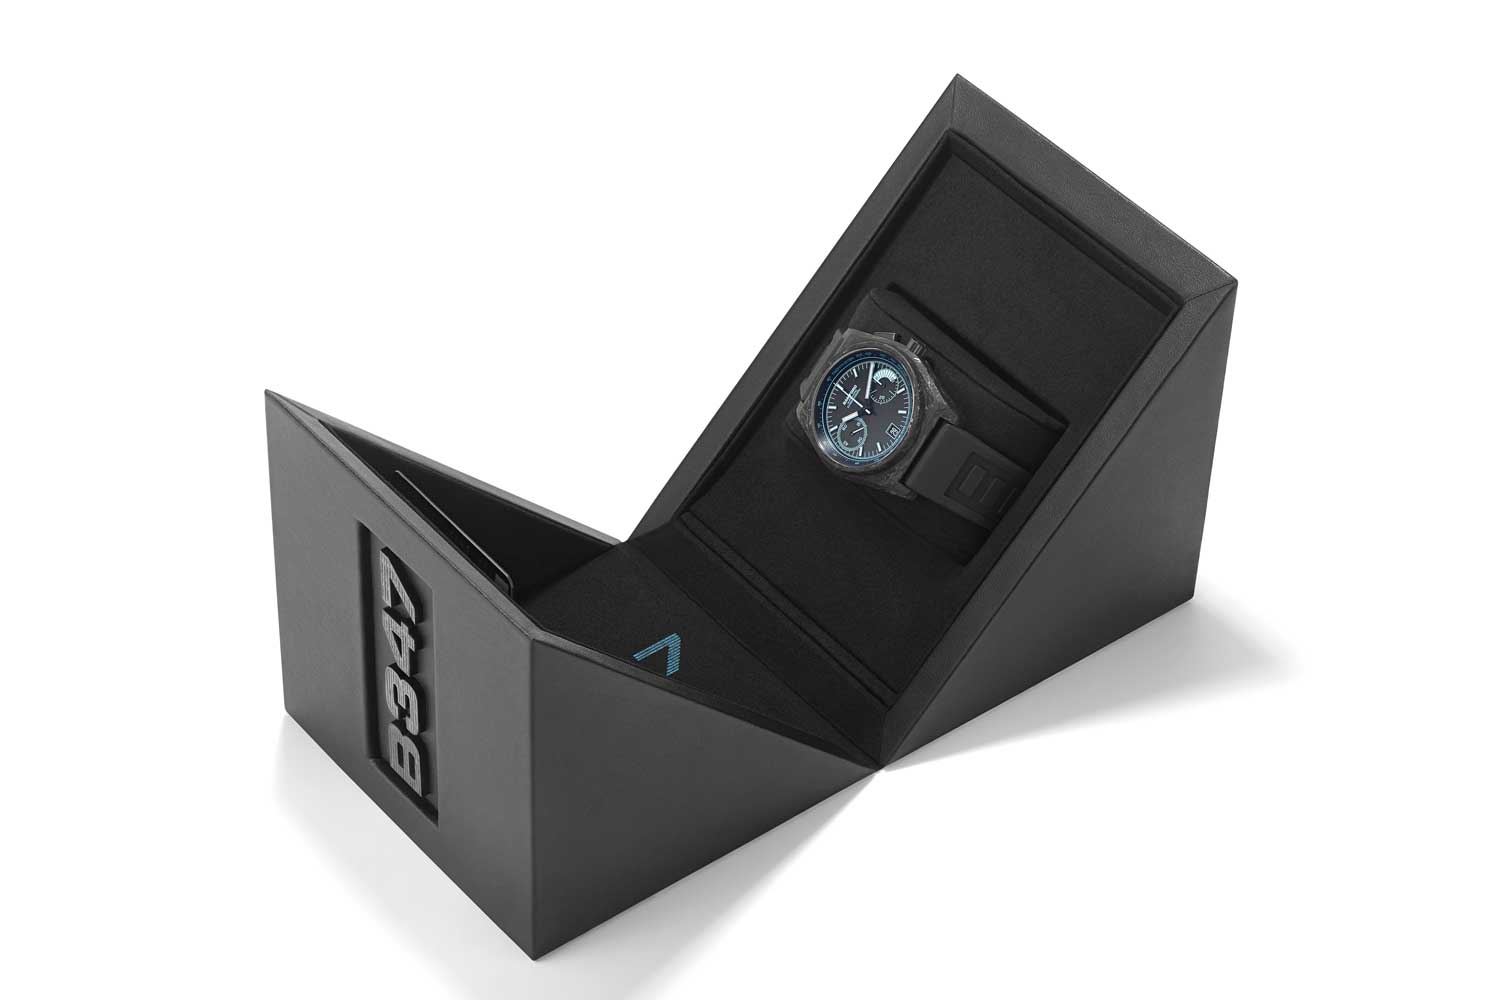 The Bamford B347 comes in an embossed black inner box and aqua outer box.